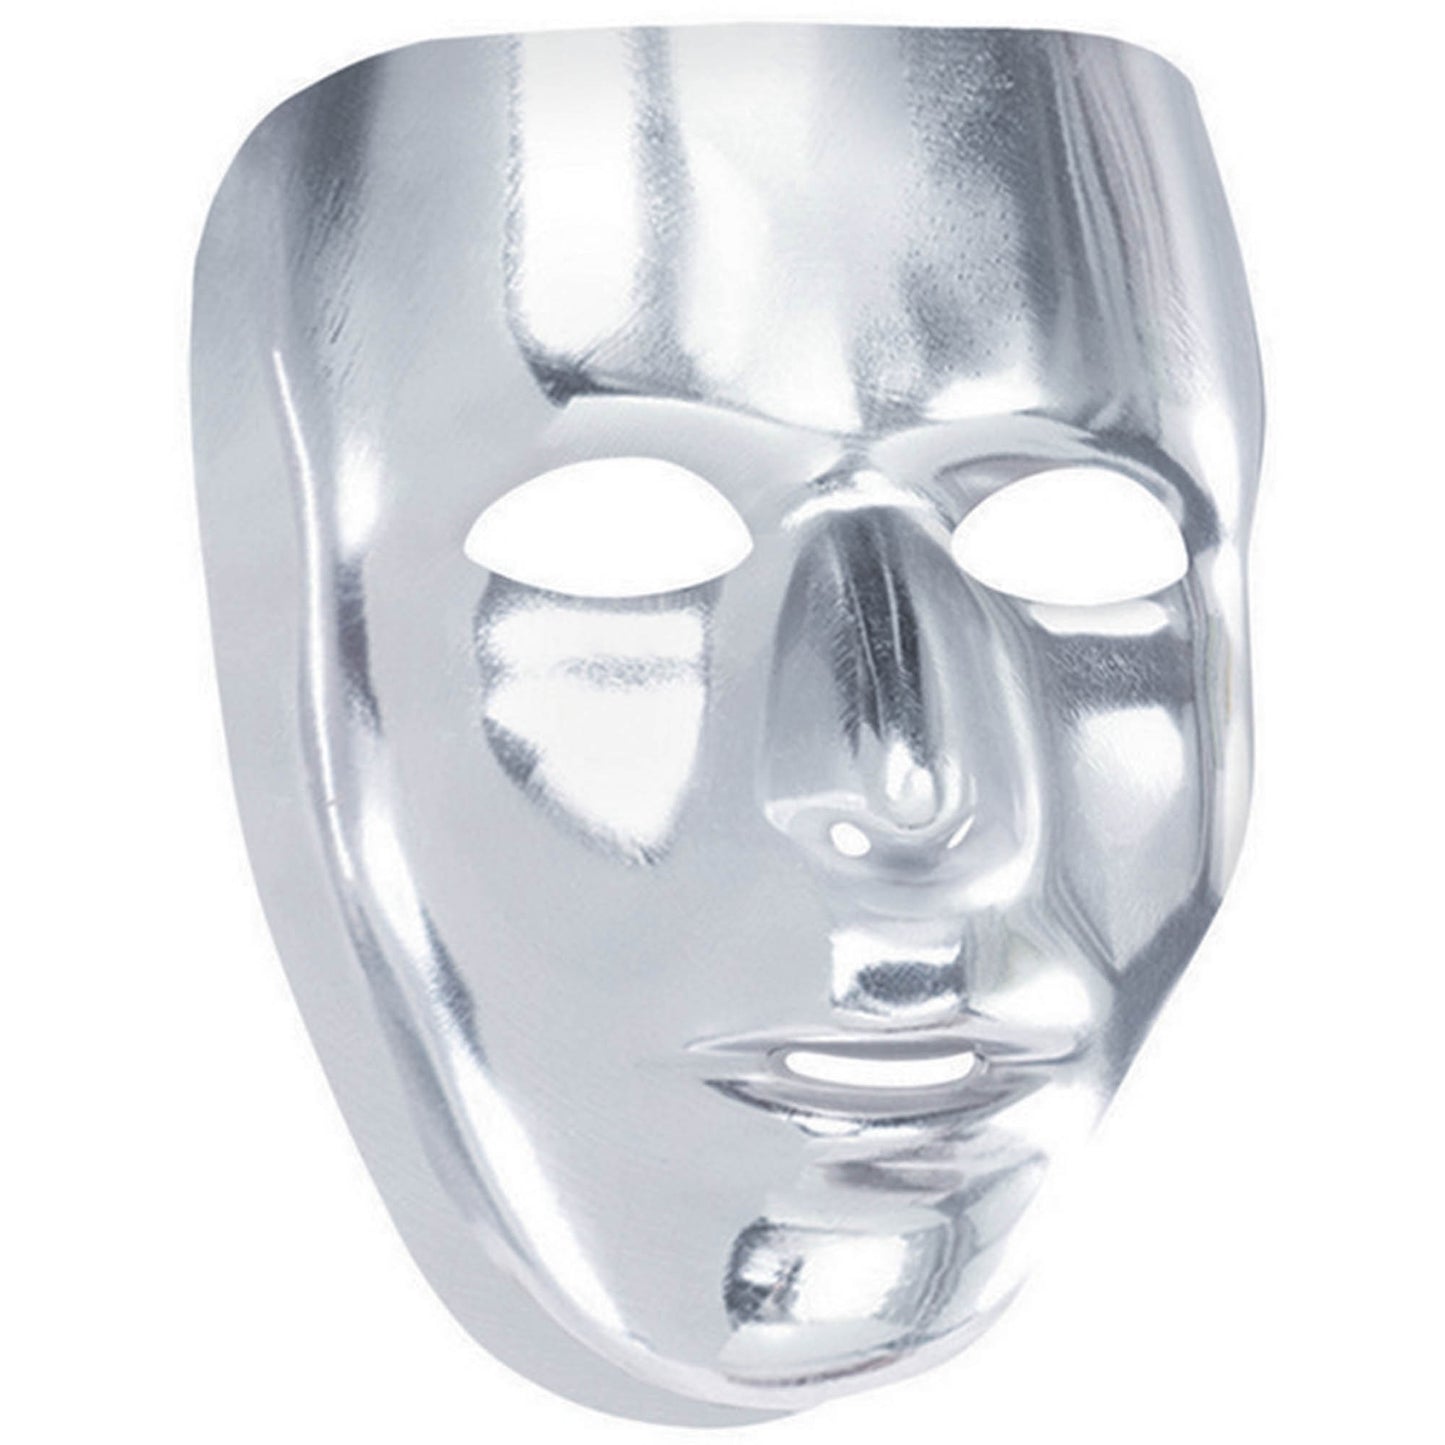 Full Face Mask - Silver